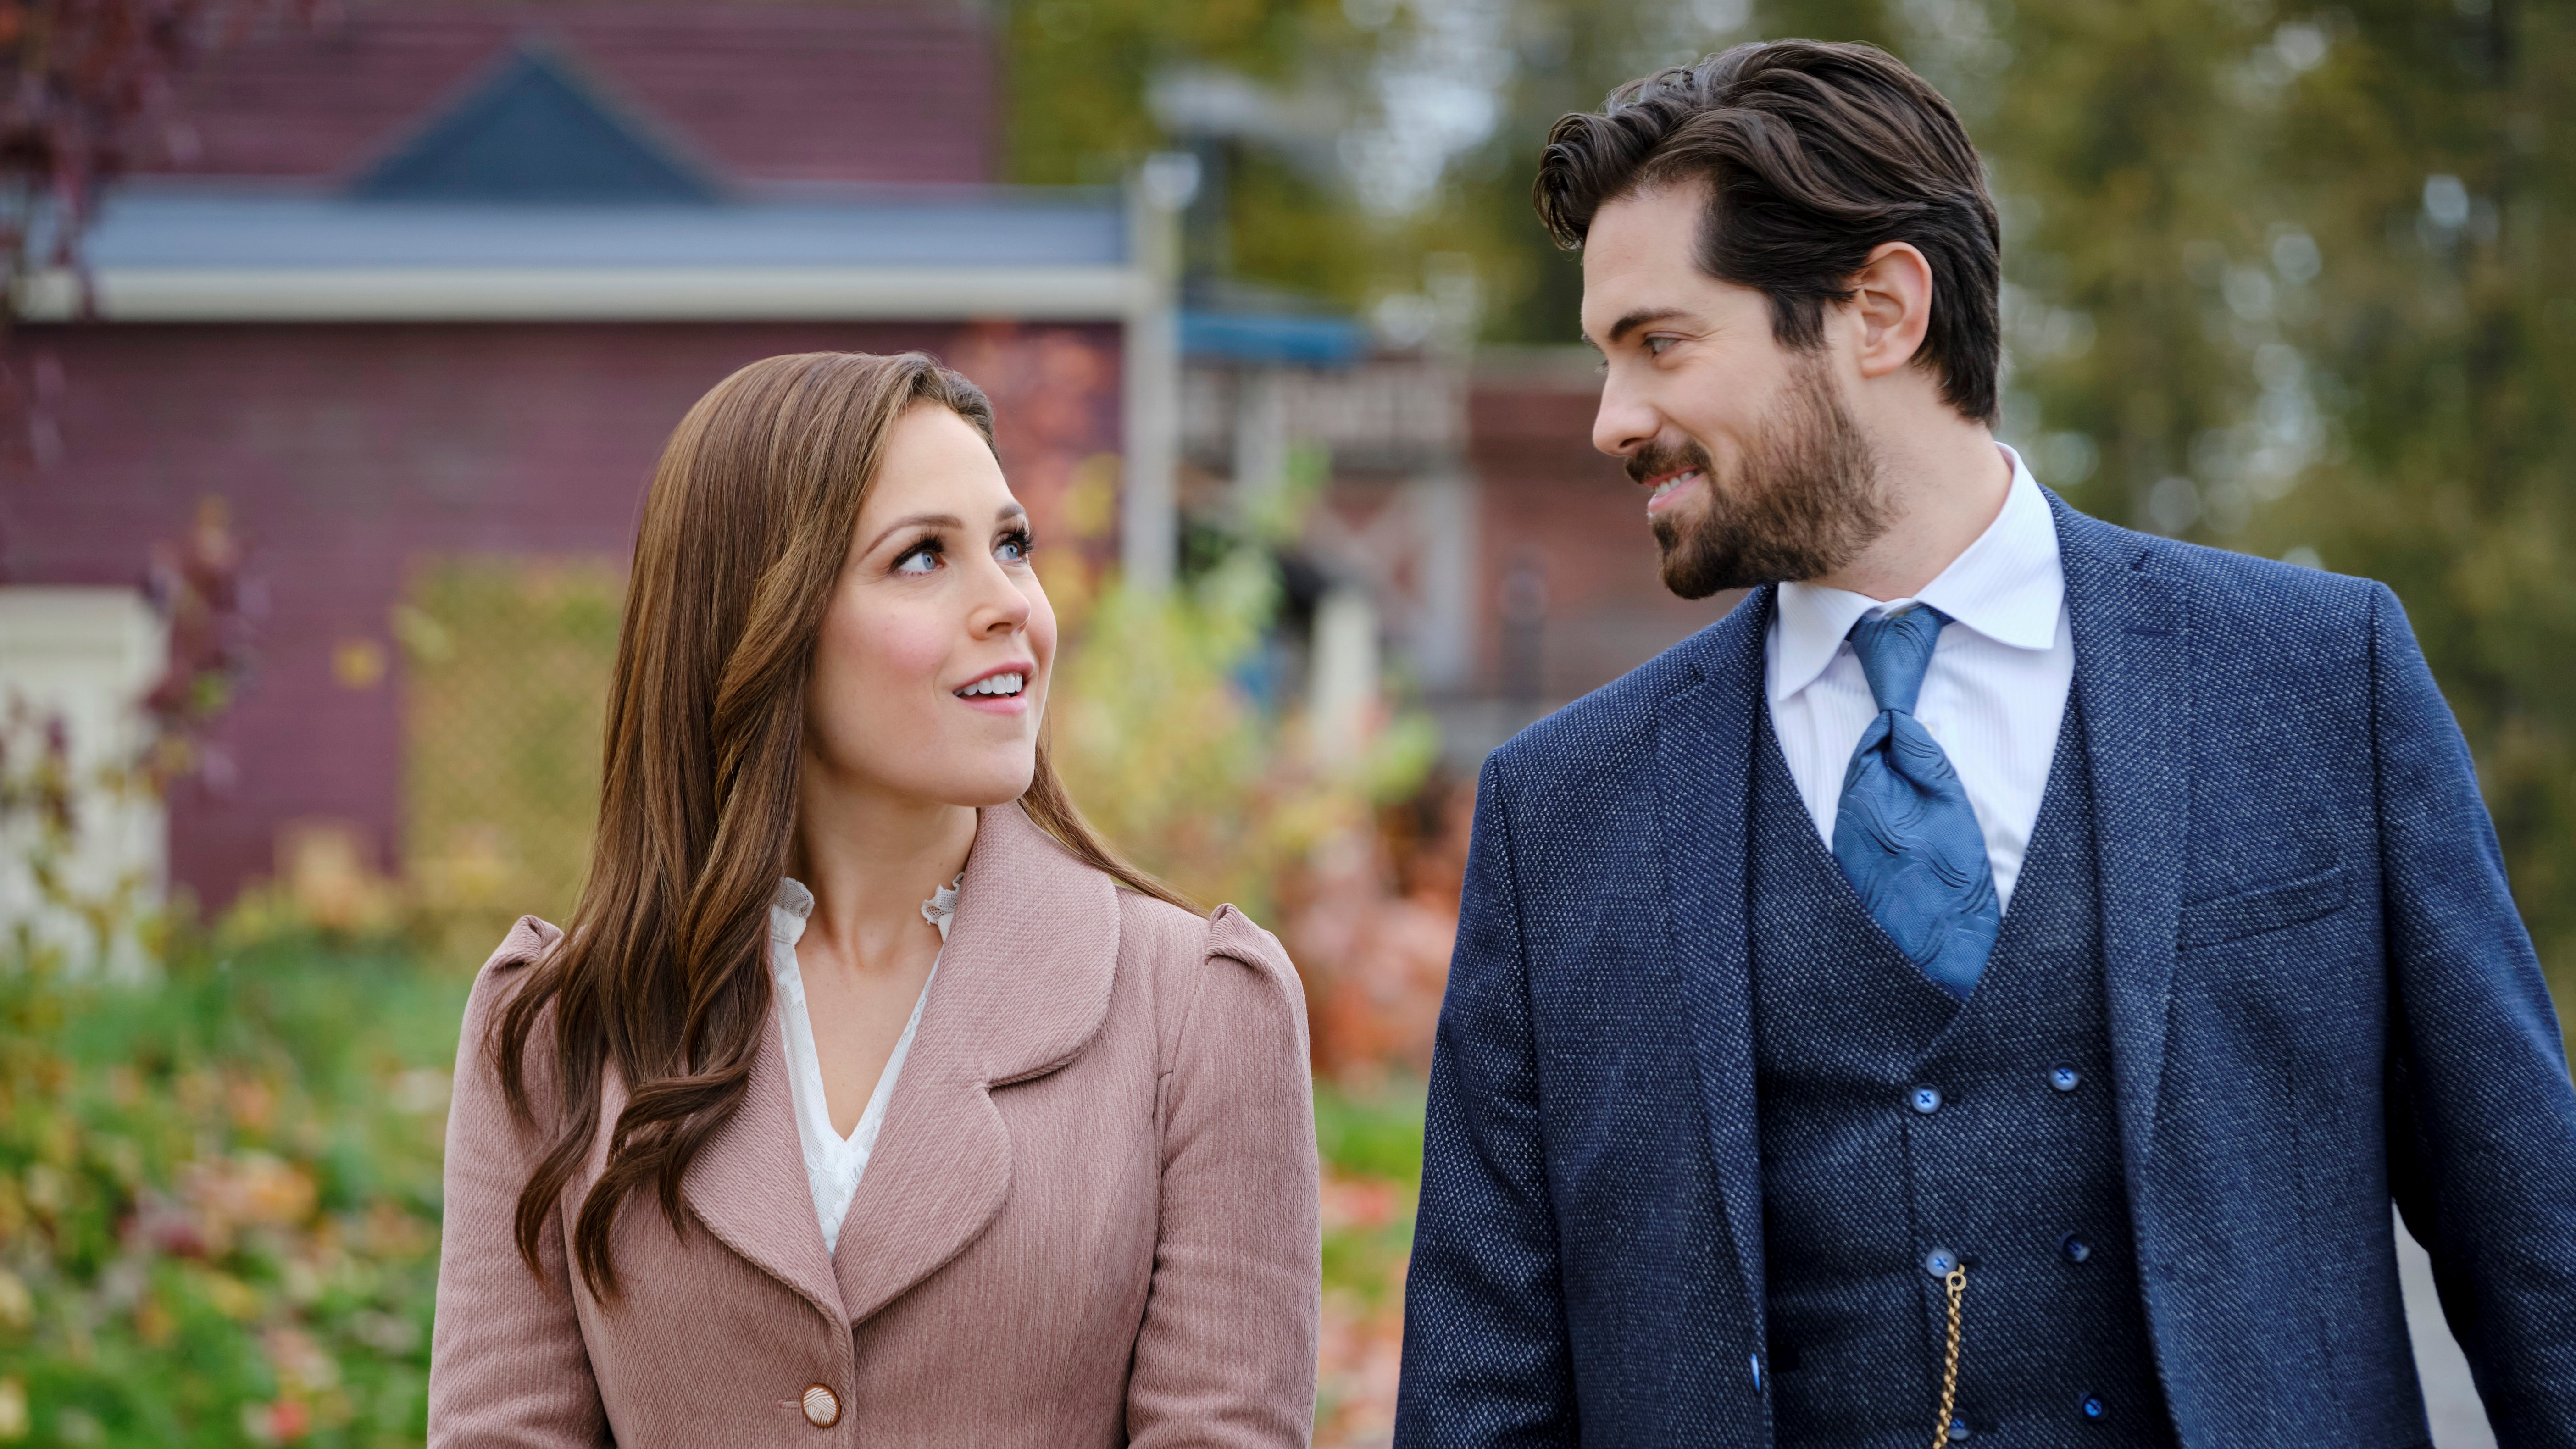 Canadian Hearties on X: #Hearties, @SCHeartHome is airing